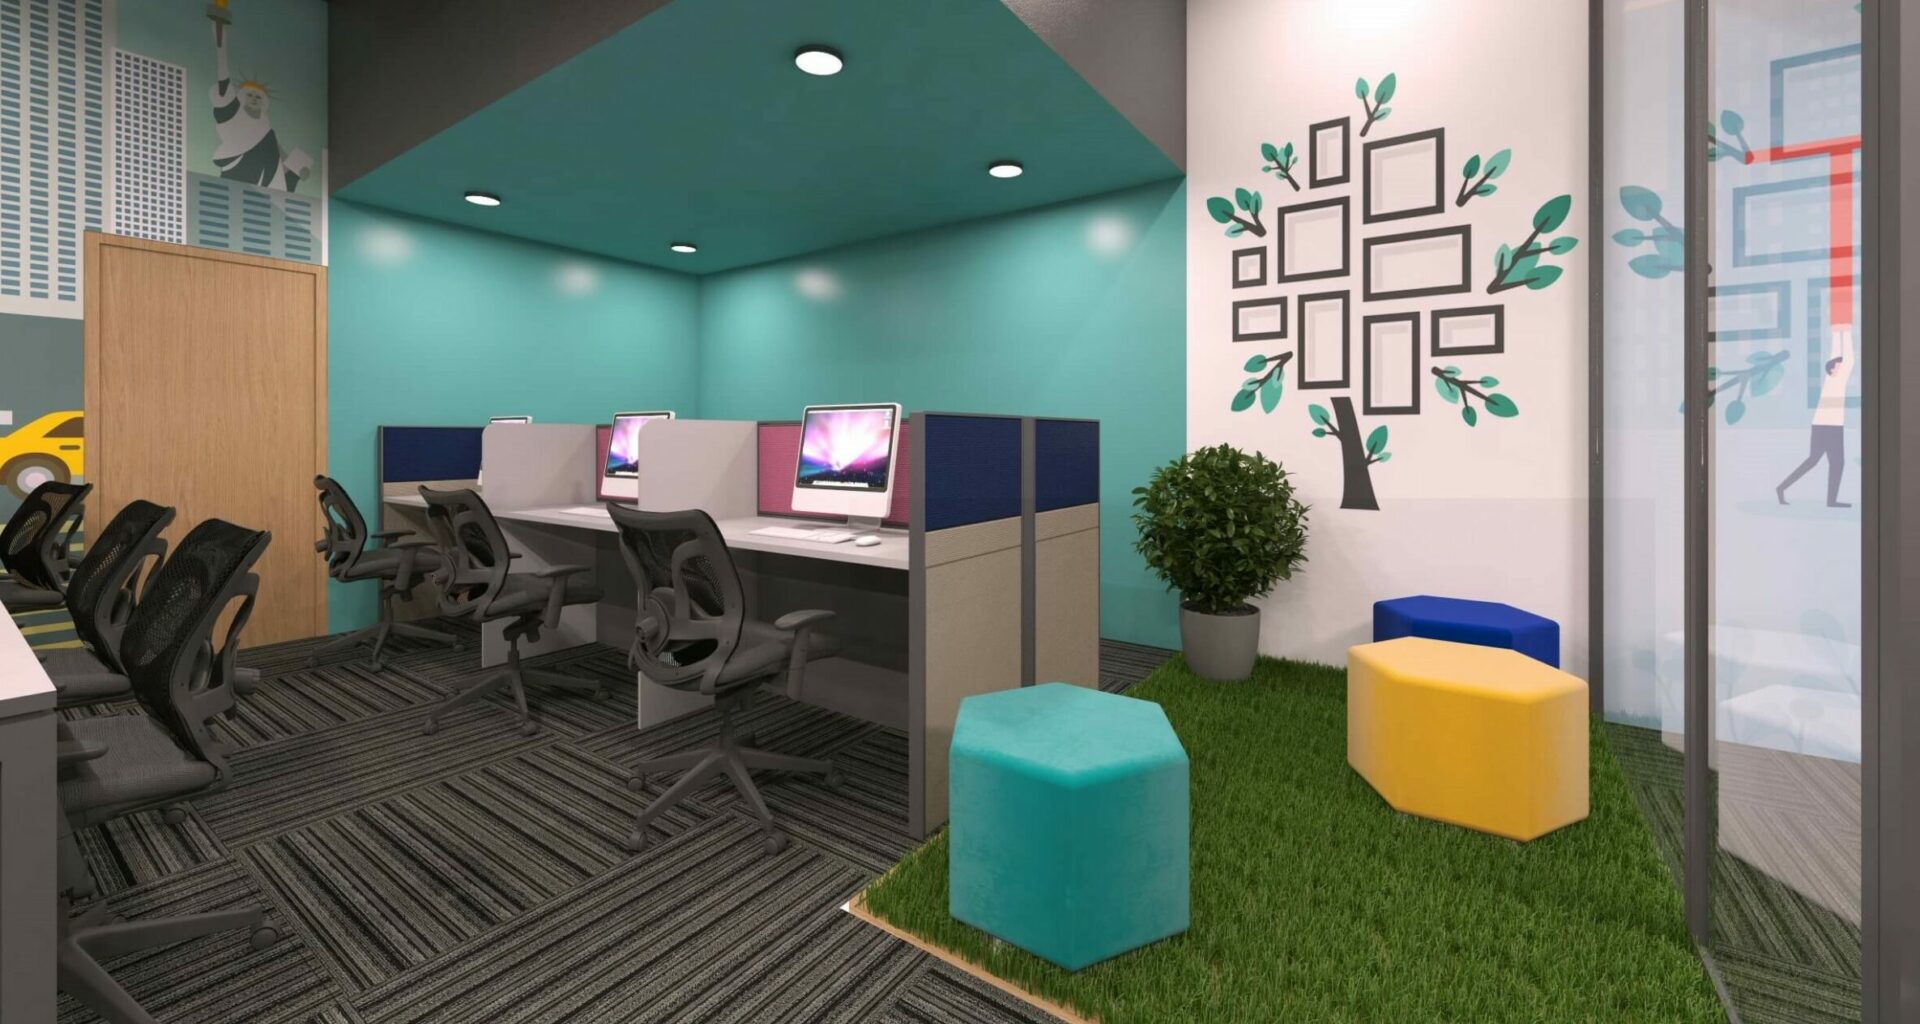 Top 10 Startup Office Design Ideas To Take Inspiration From Devx